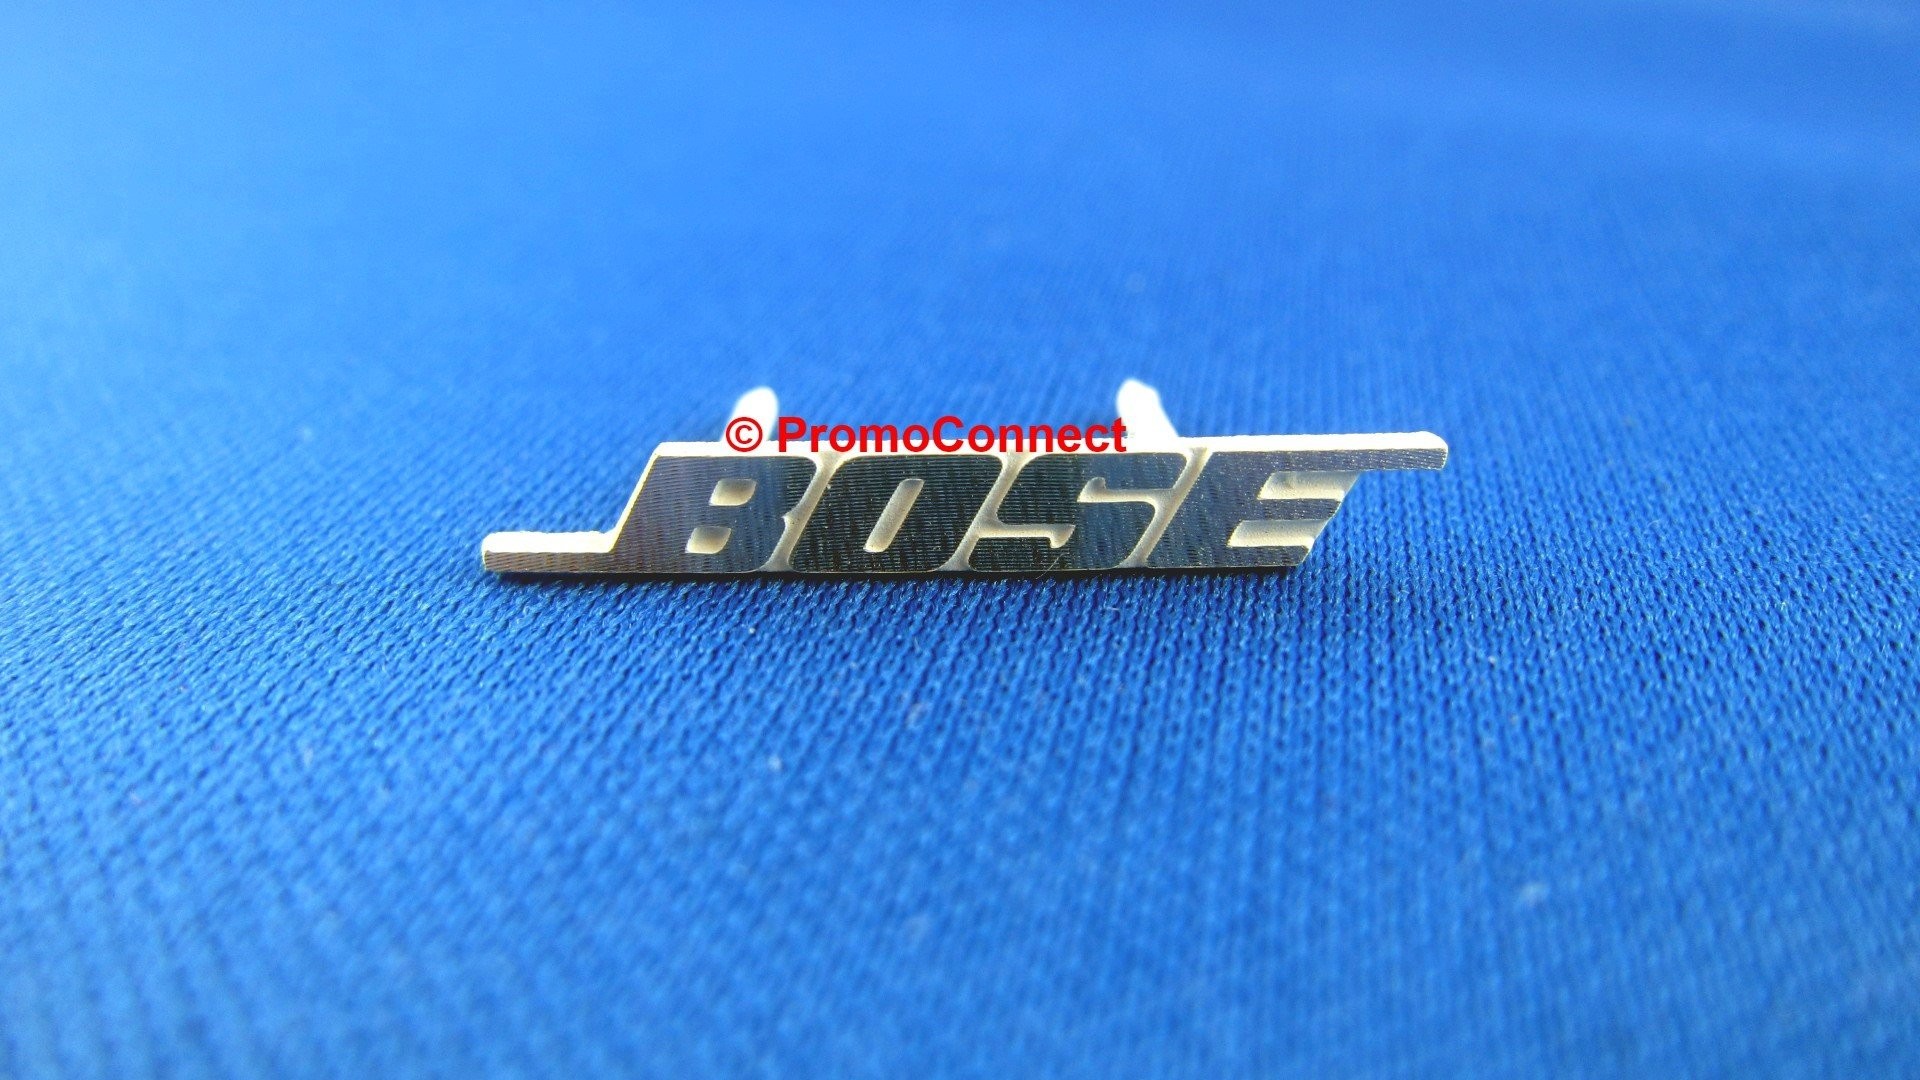 1920x1080 Bose Logo 17094, the images come in a variety of shapes and sizes due